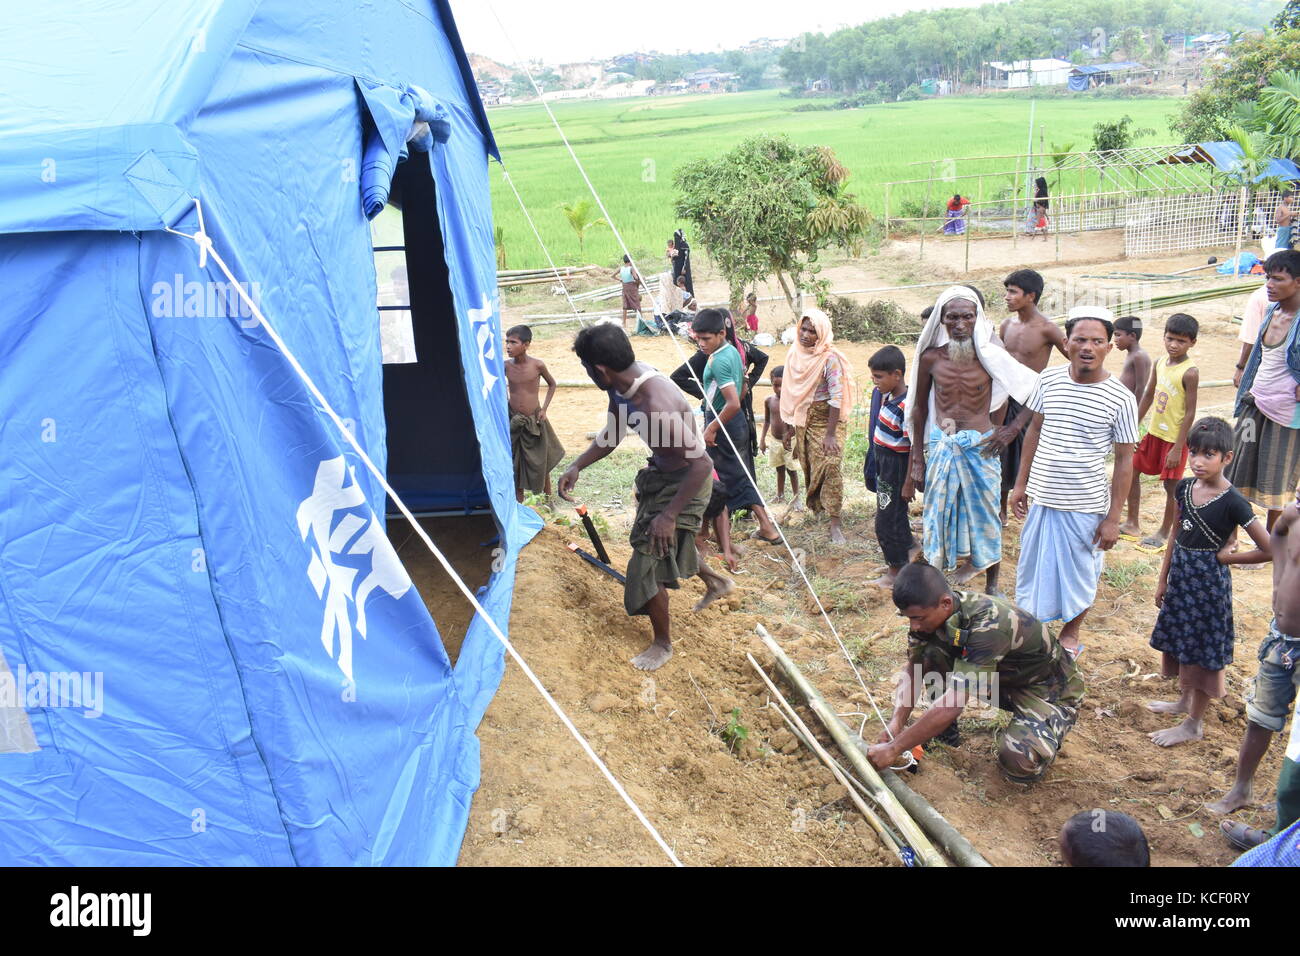 (171004) -- DHAKA, Oct. 4, 2017 (Xinhua) -- An Army personnel helps a Rohingya family to set up Chinese relief tent at a camp in Cox's Bazaar district, Bangladesh, on Oct. 3, 2017. China has sent relief supplies for Rohingya refugees in Bangladesh recently. (Xinhua/Jibon Ahsan) (zcc) Stock Photo